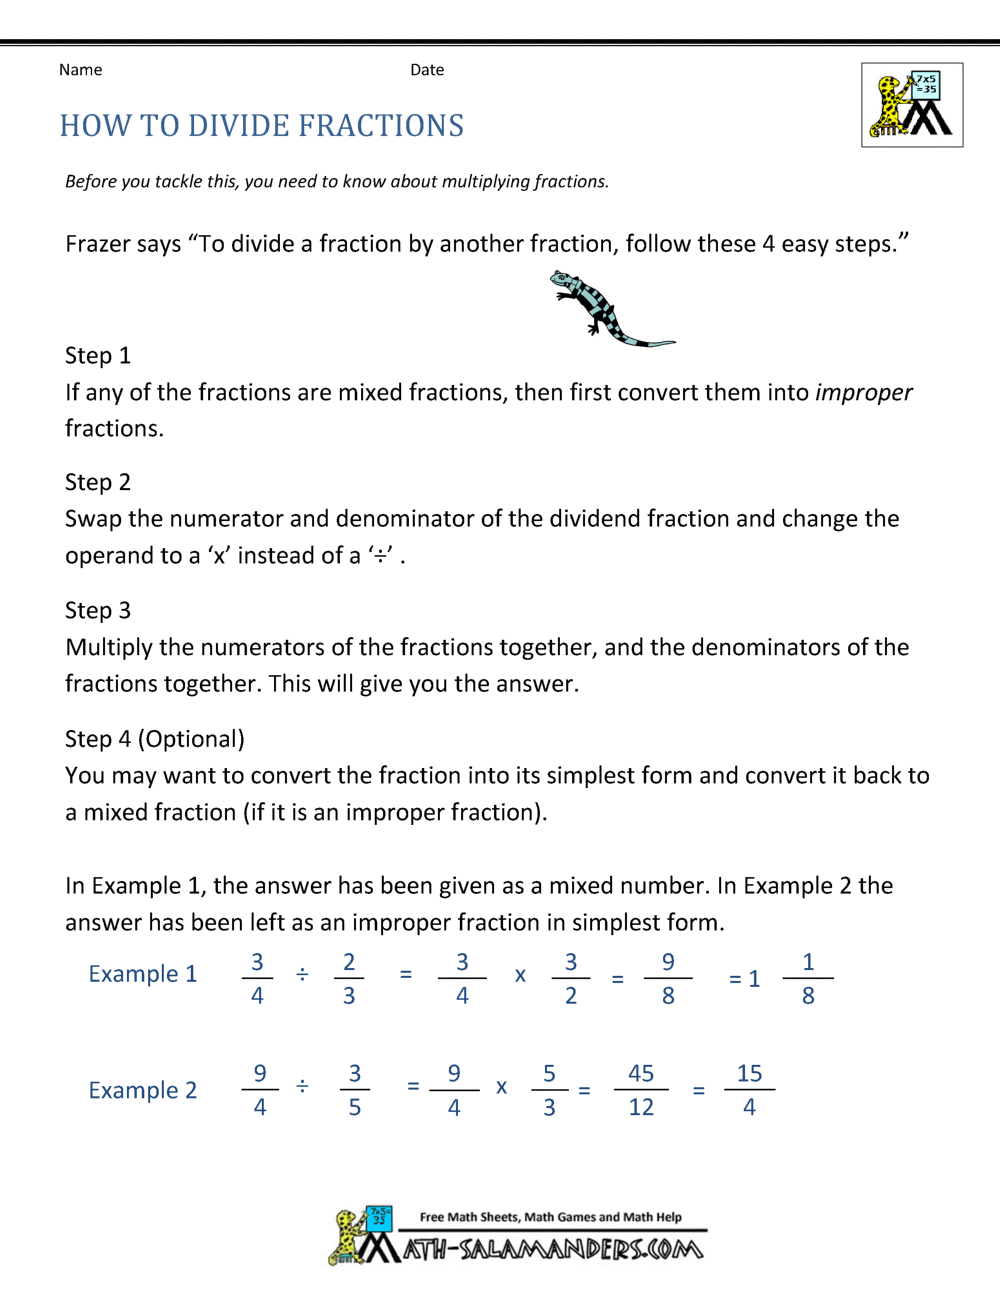 How to Divide Fractions For Dividing Fractions Word Problems Worksheet